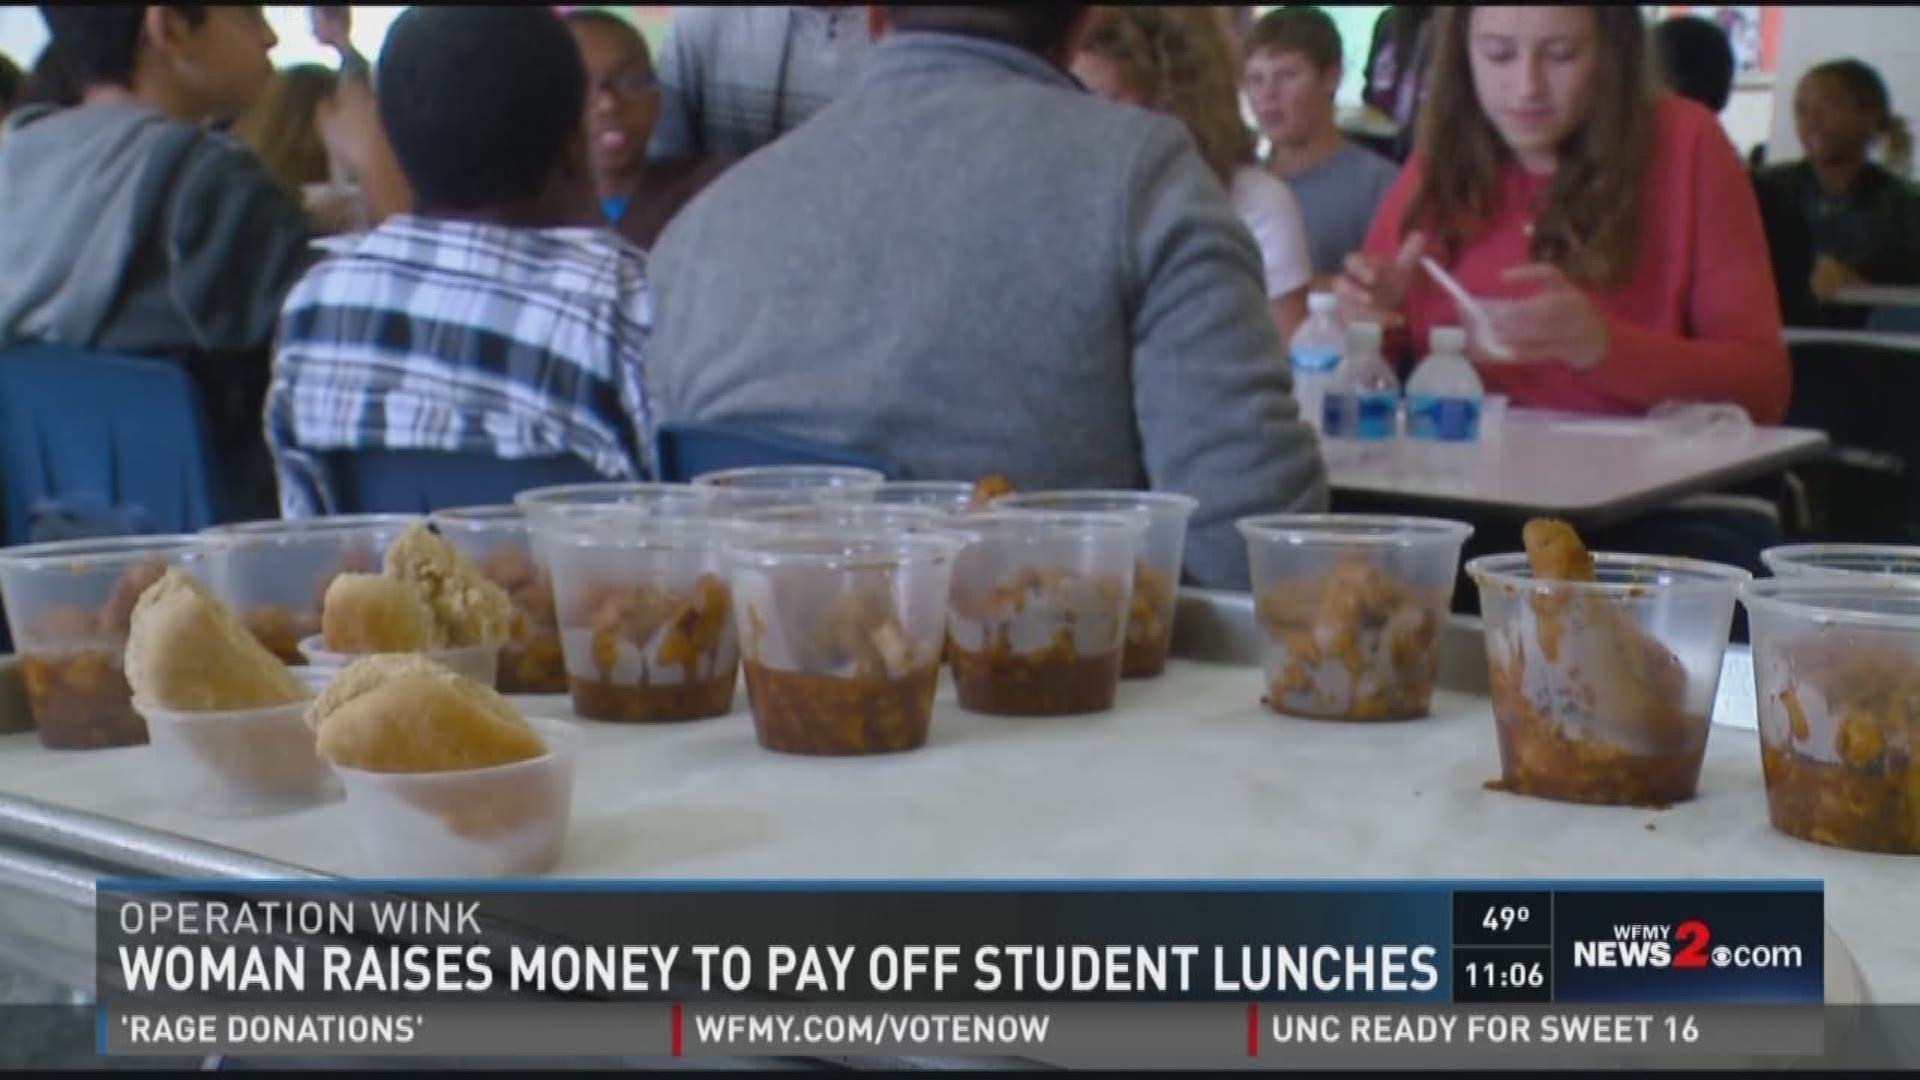 Woman Raises Money to Pay Off Student Lunches